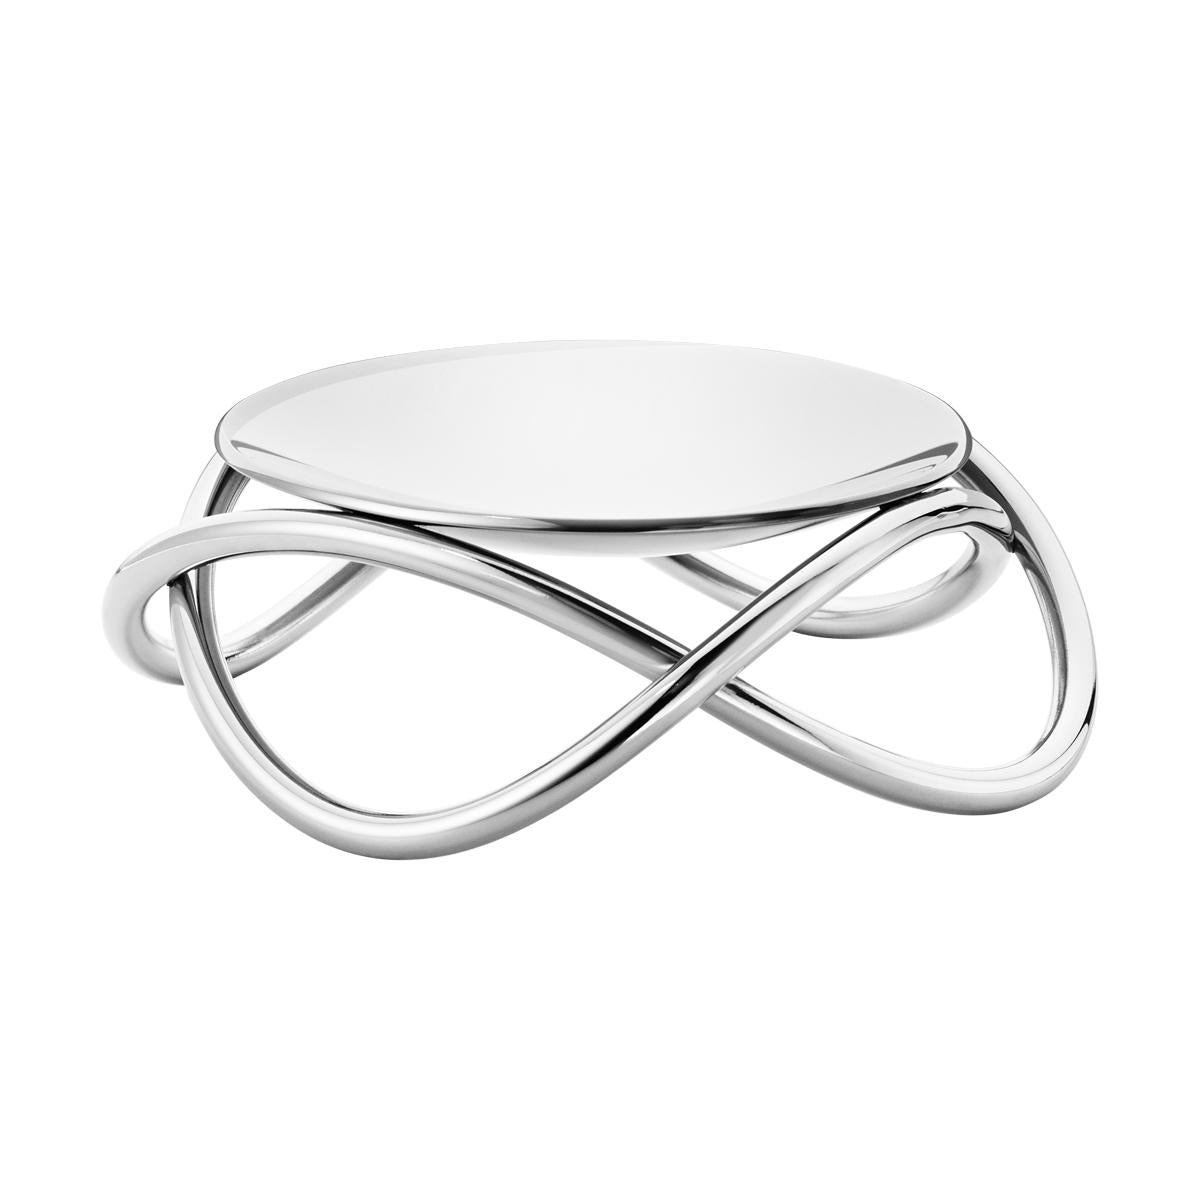 Georg Jensen Glow Candle Holder Stainless Steel